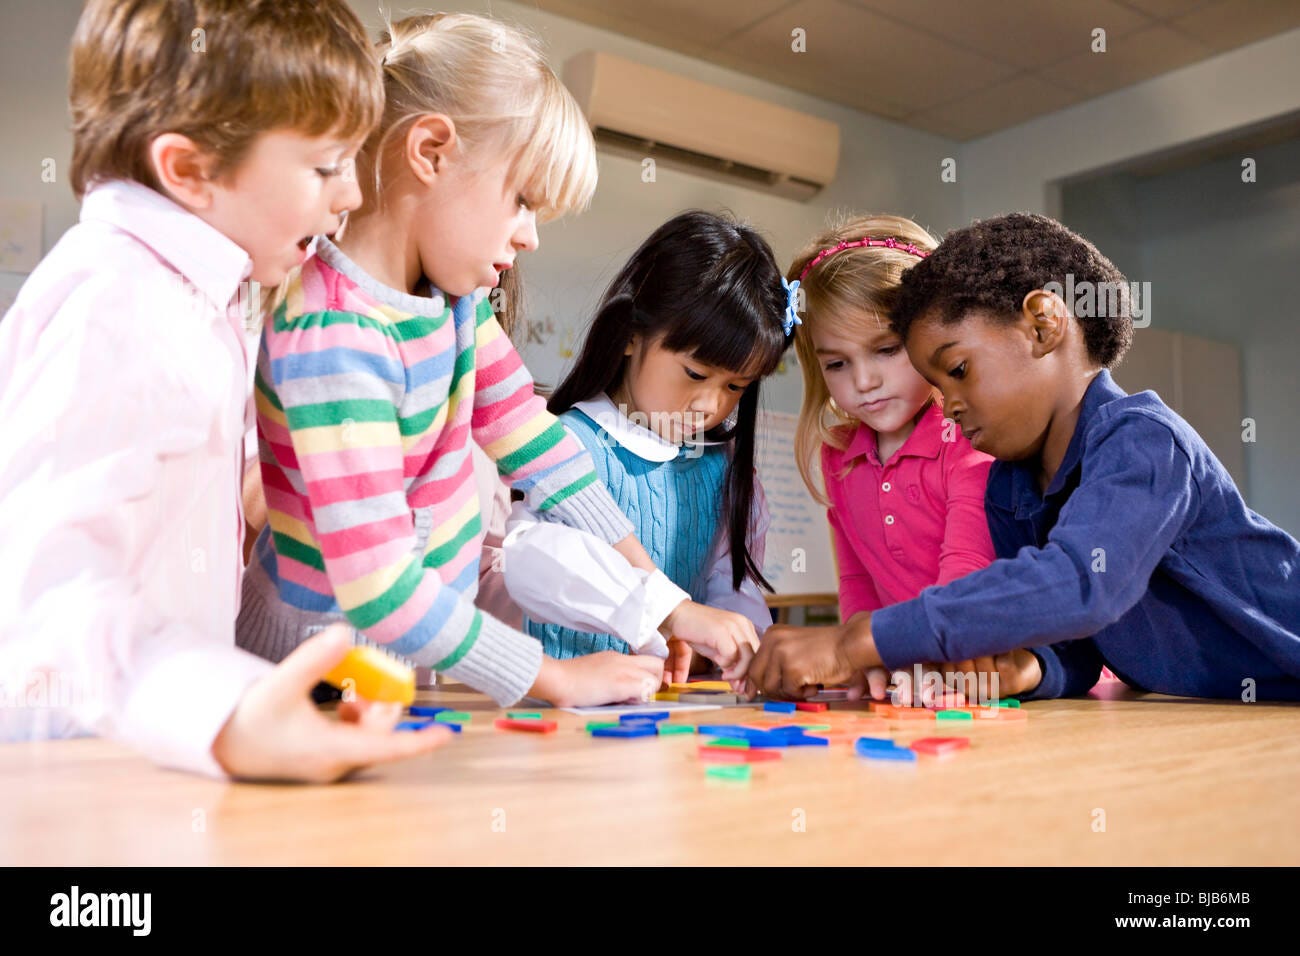 Preschool children working together on puzzle Stock Photo - Alamy